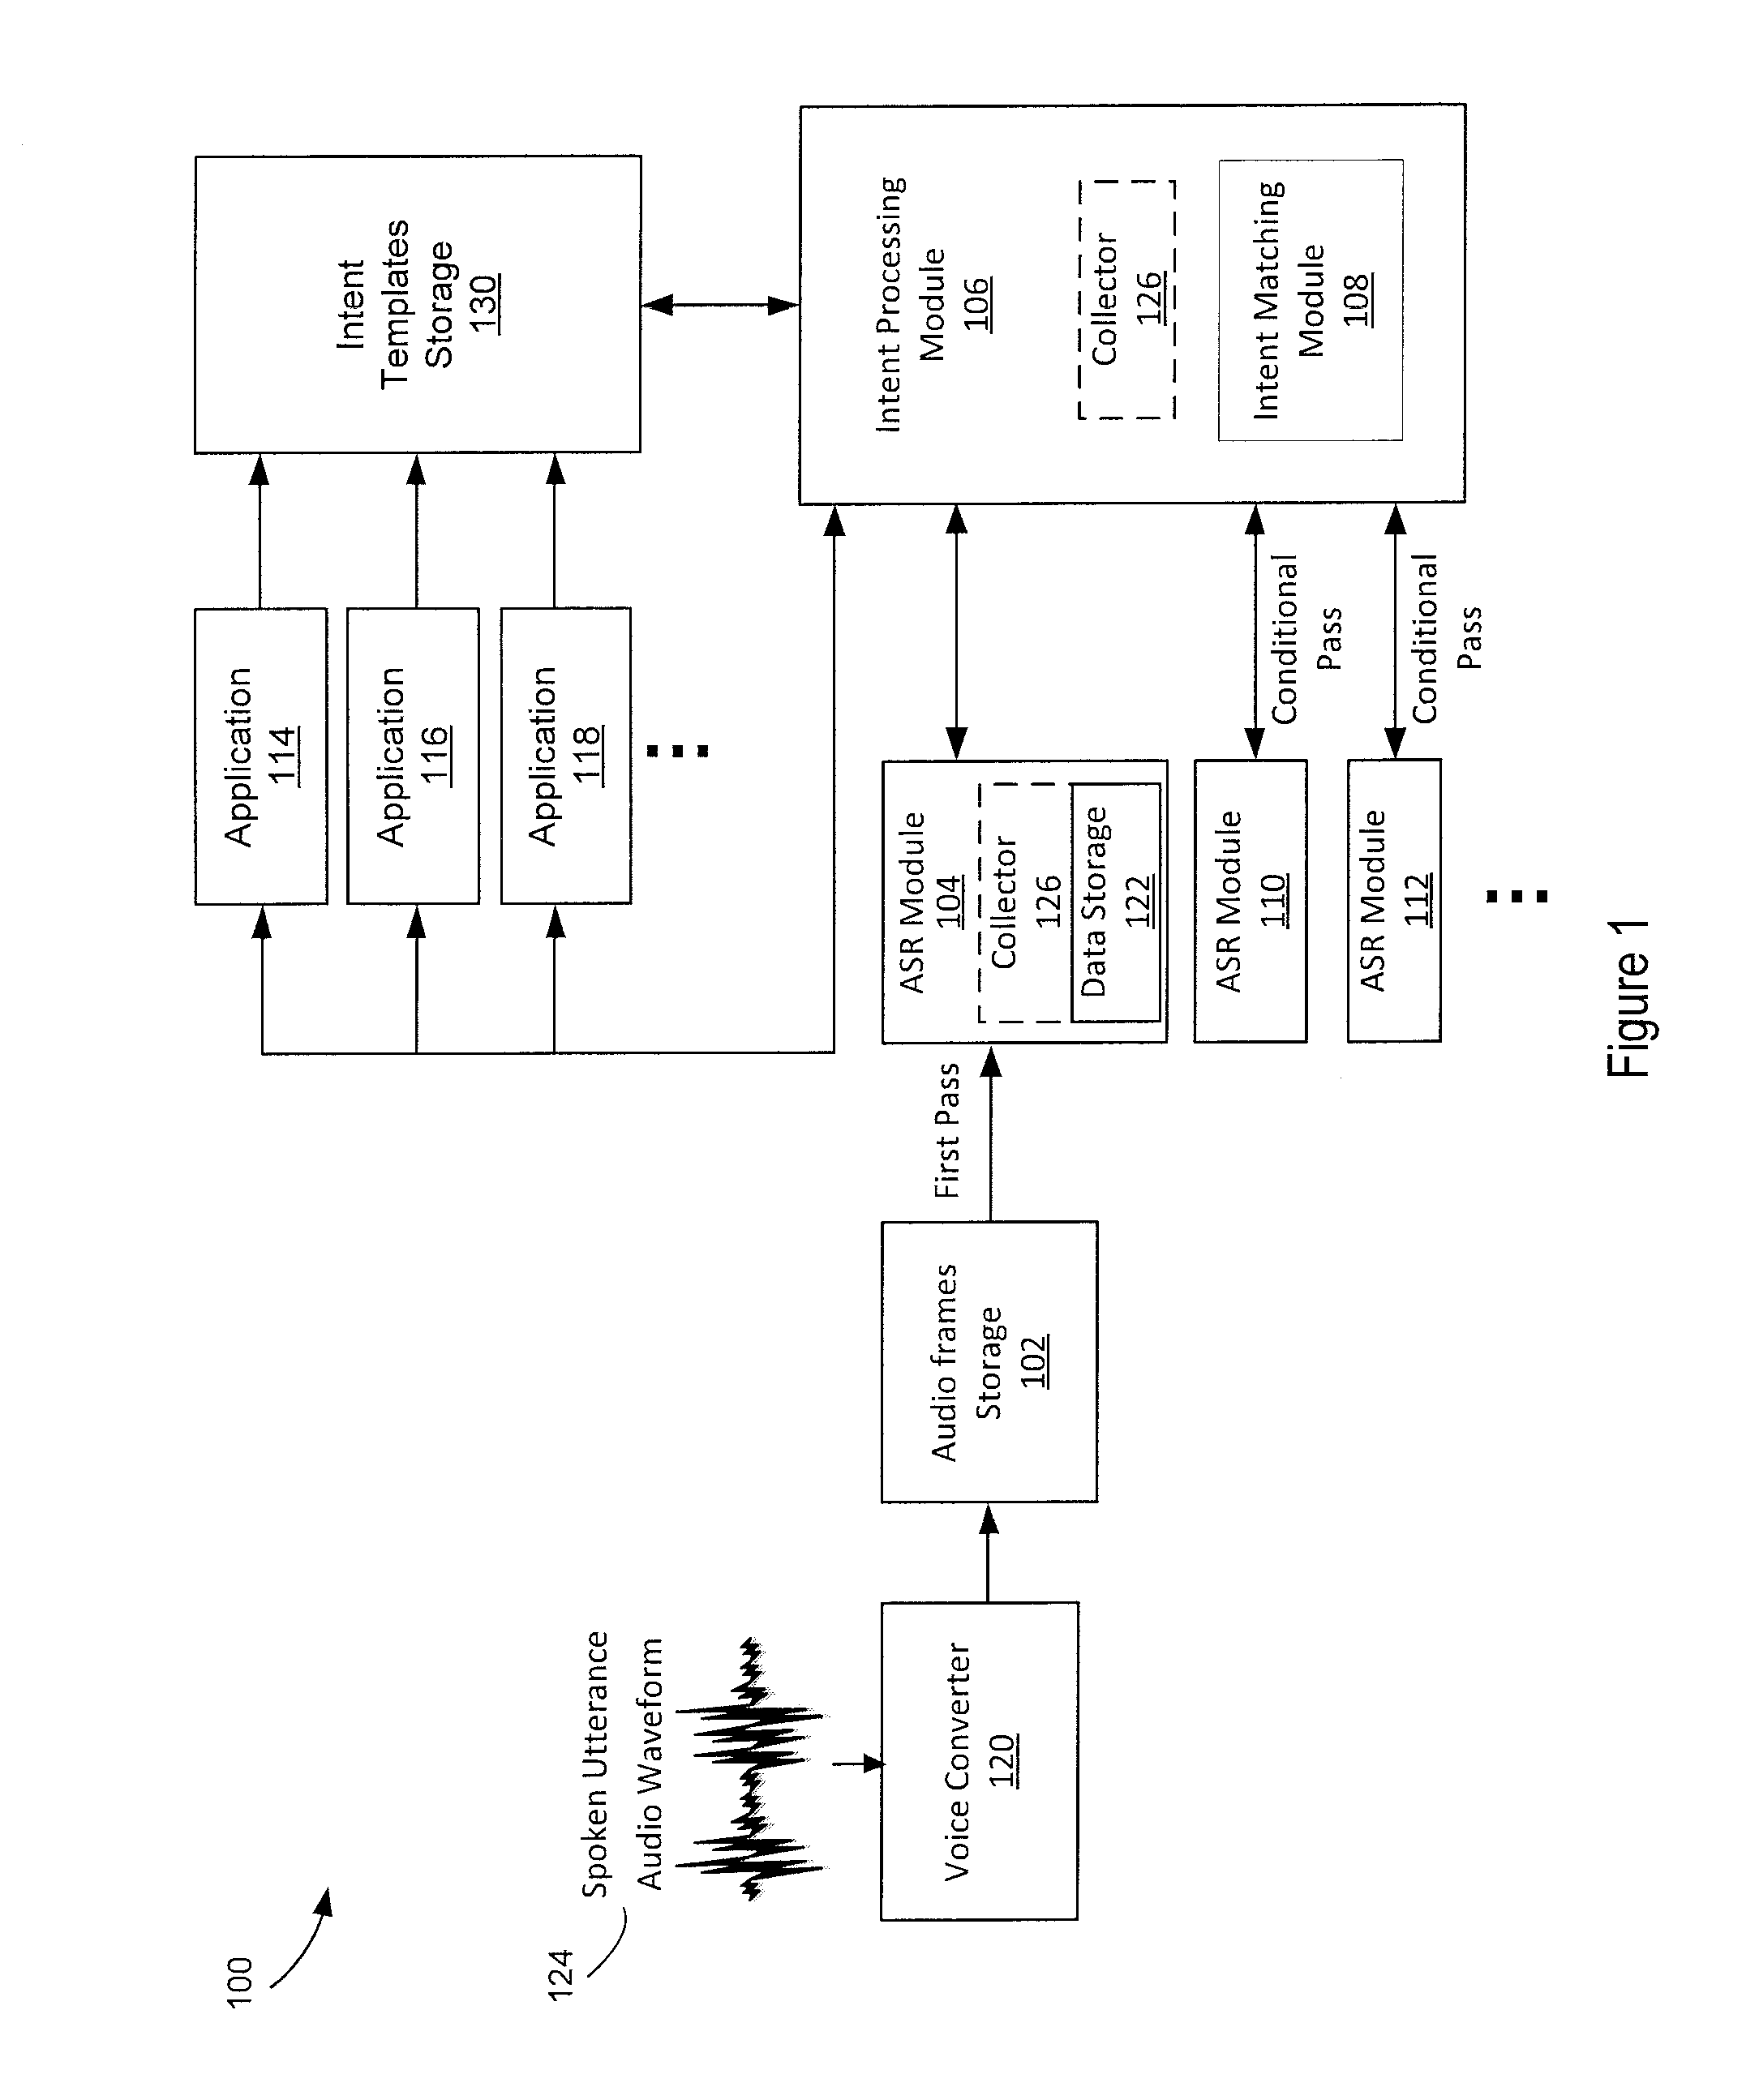 Conditional multipass automatic speech recognition